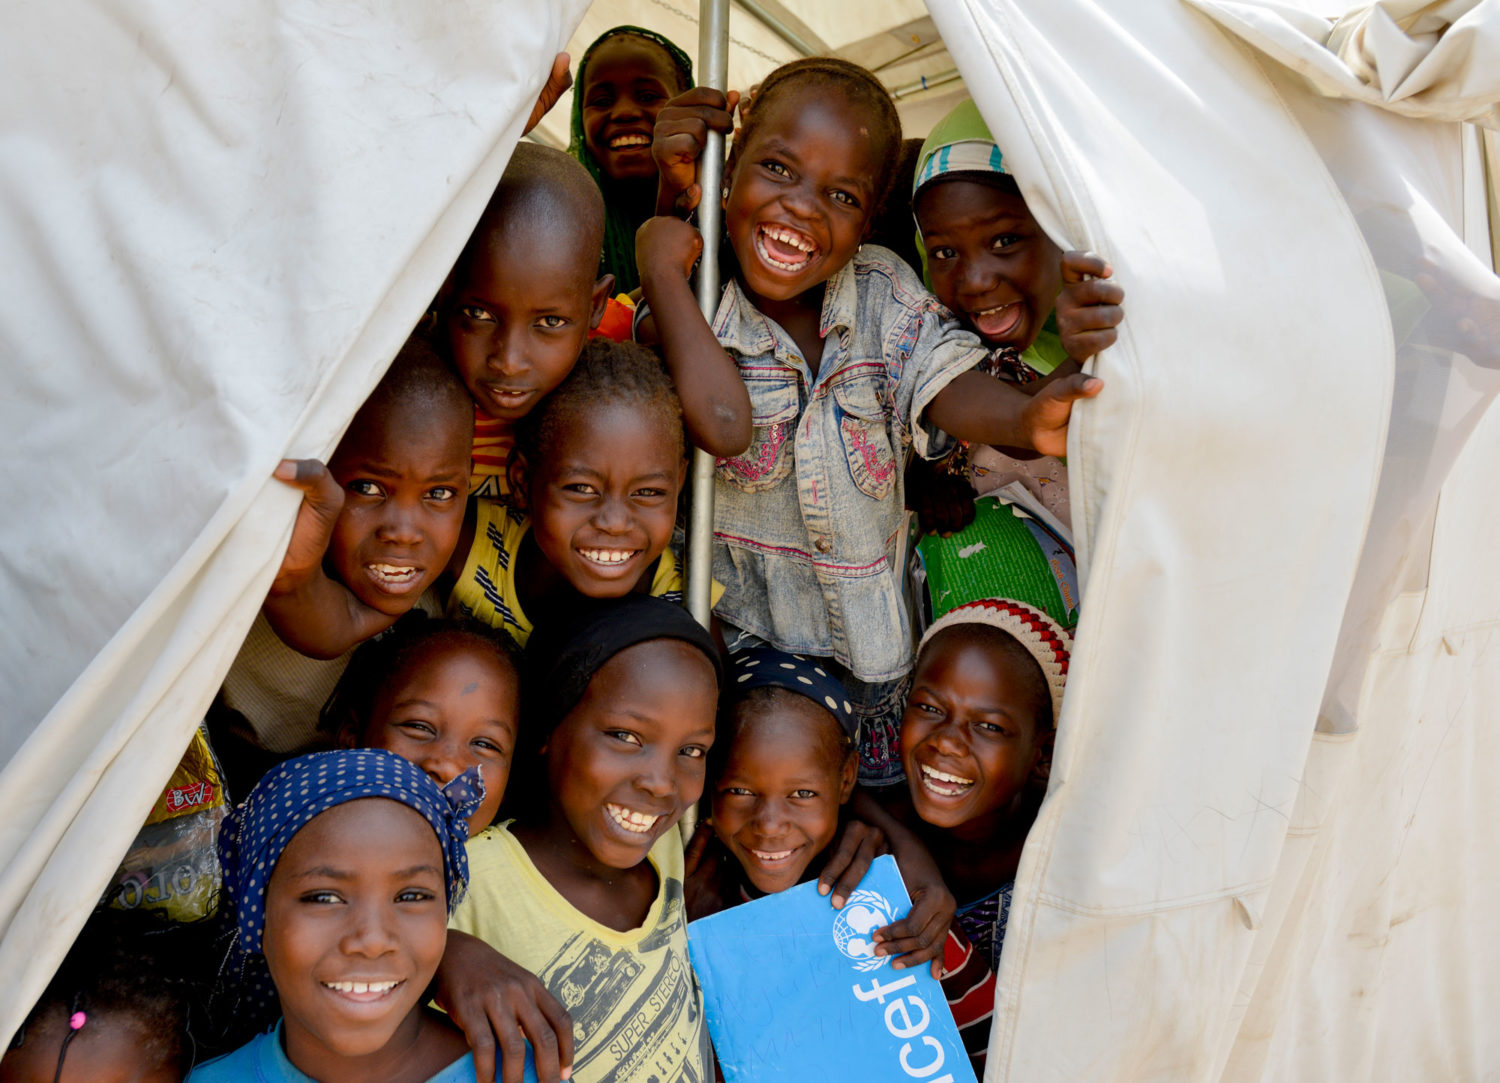 Remember someone special with a gift in memory to help keep children safe, like these children smiling in a Unicef-supported tent in Nigeria. Unicef 2015 Rich